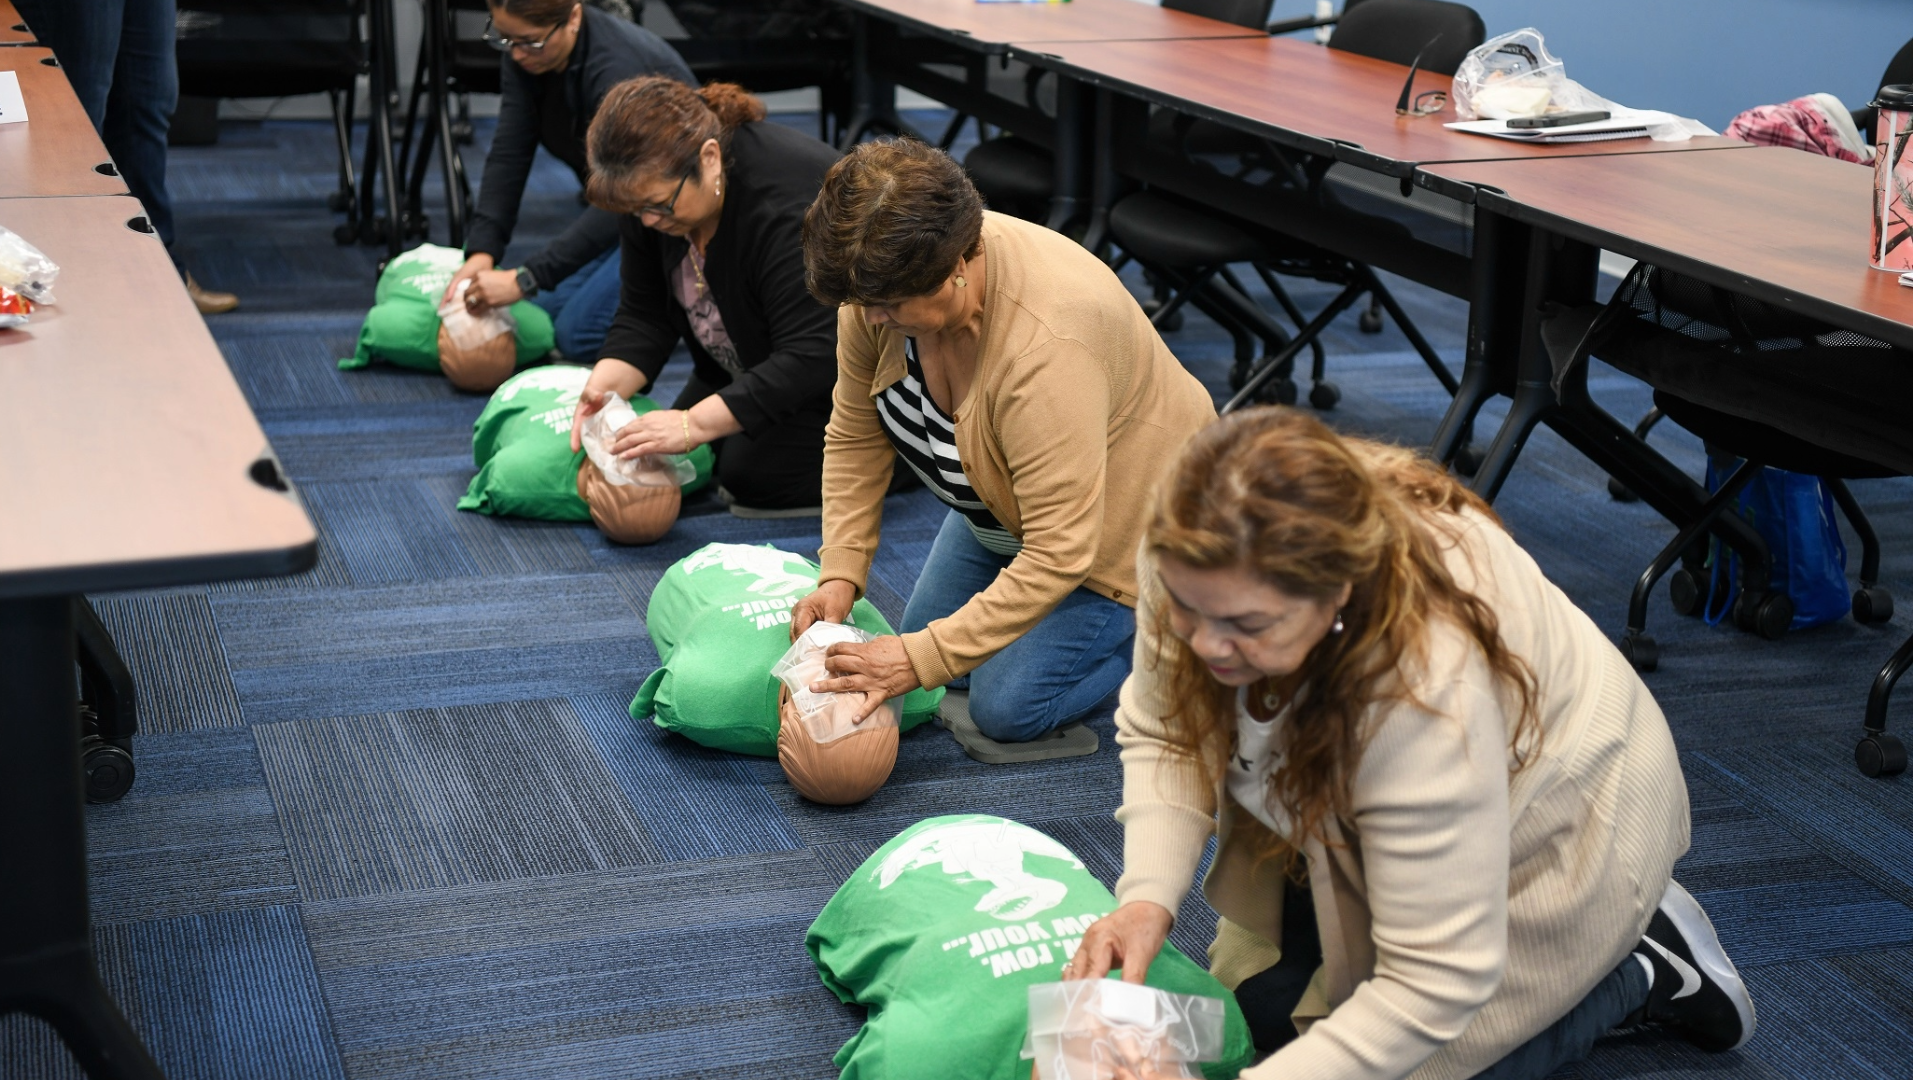 Four adults performing CPR on a dummy during a training.